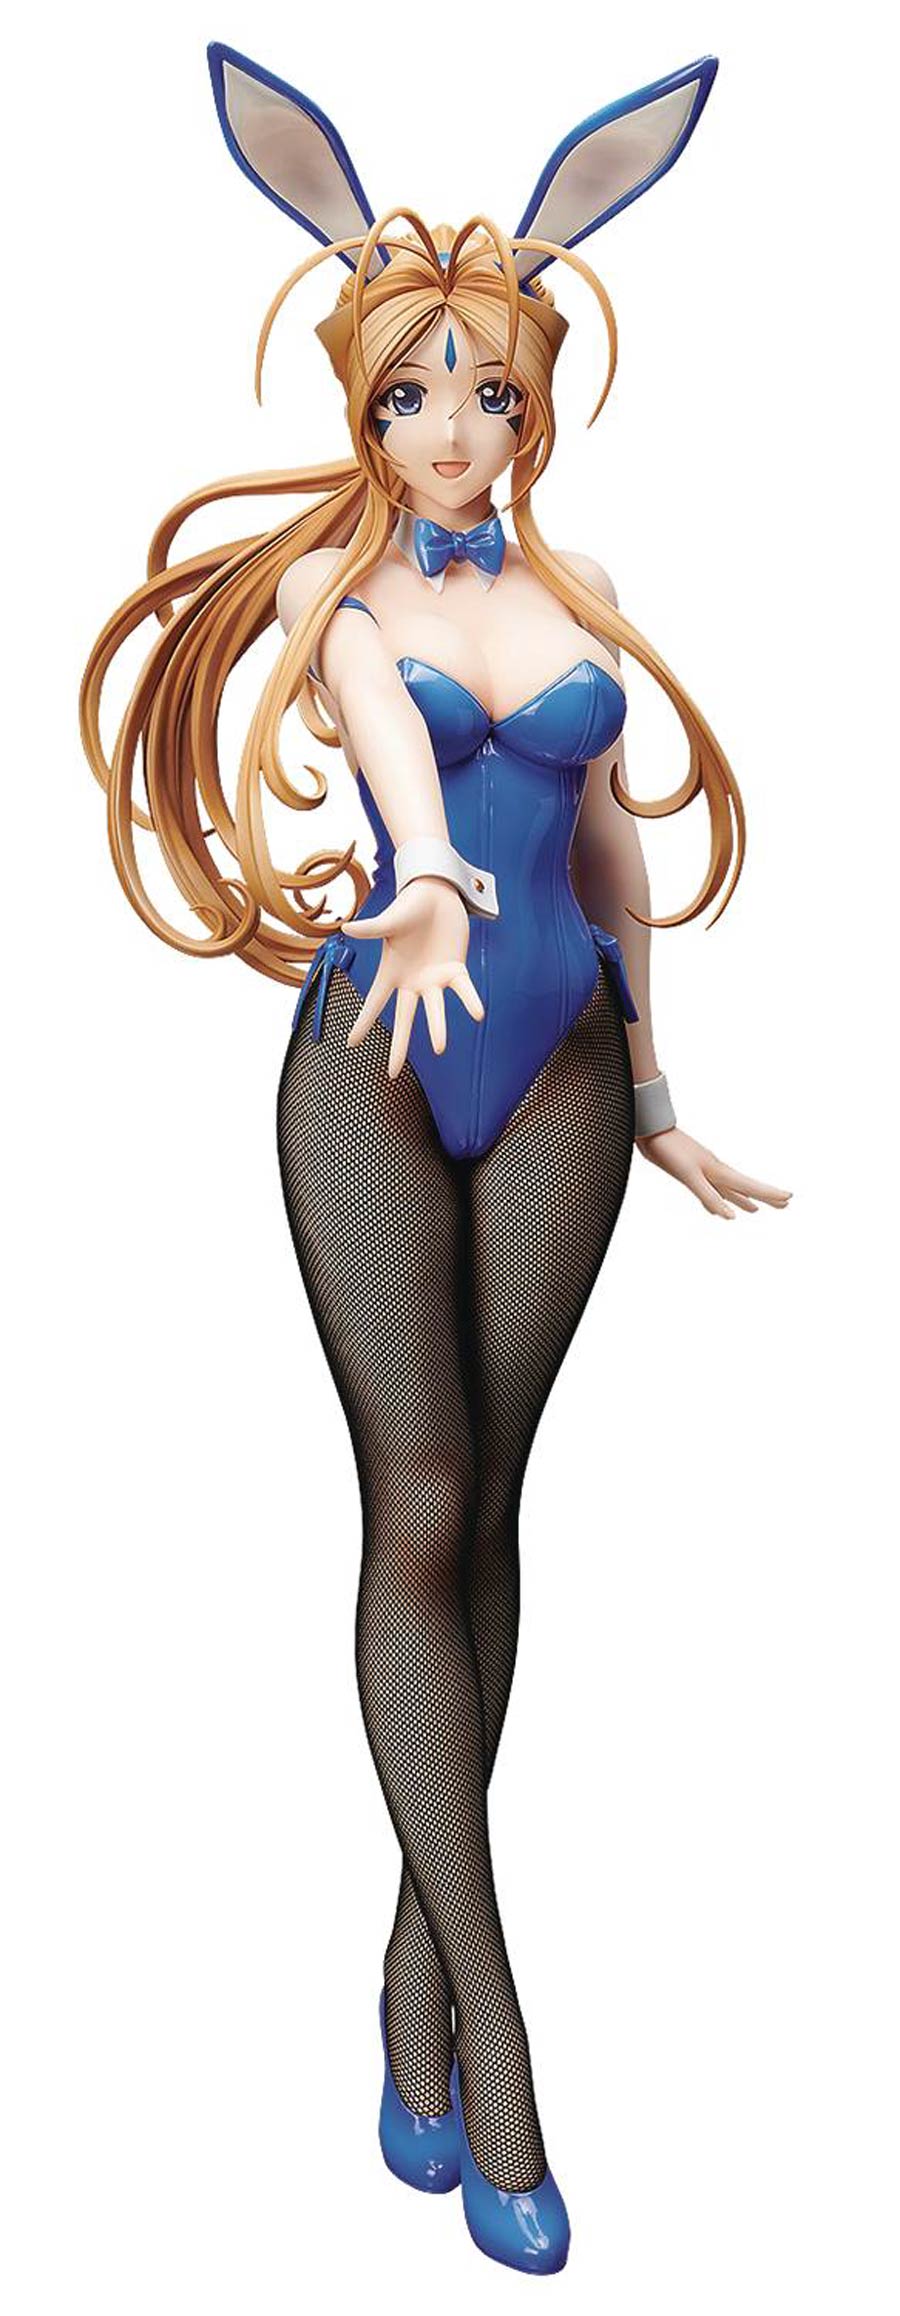 Oh My Goddess Belldandy Bunny Outfit 1/4 Scale PVC Figure